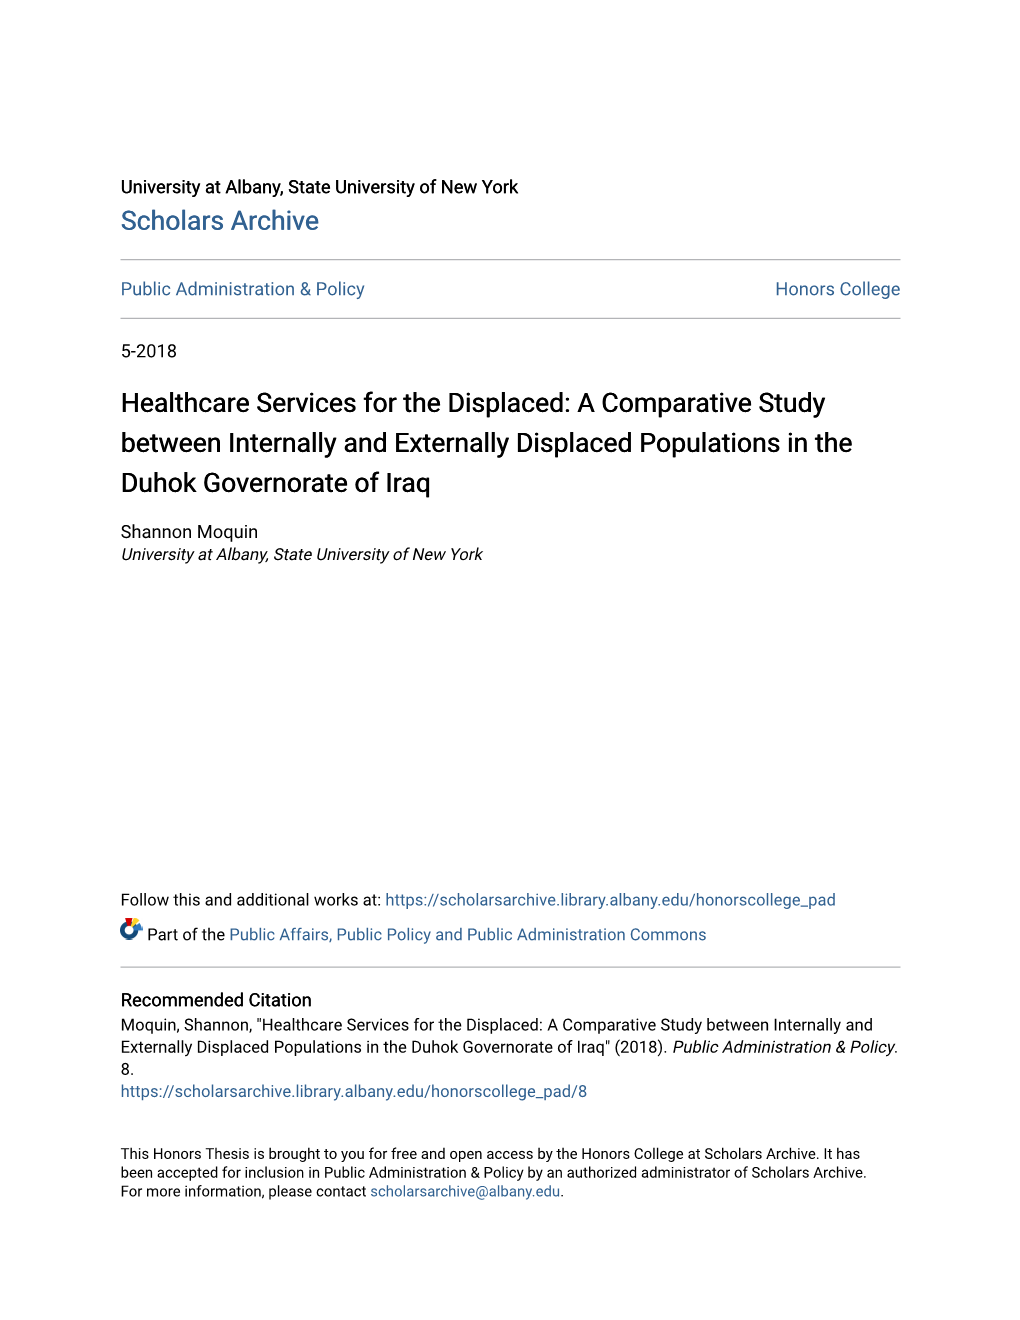 A Comparative Study Between Internally and Externally Displaced Populations in the Duhok Governorate of Iraq